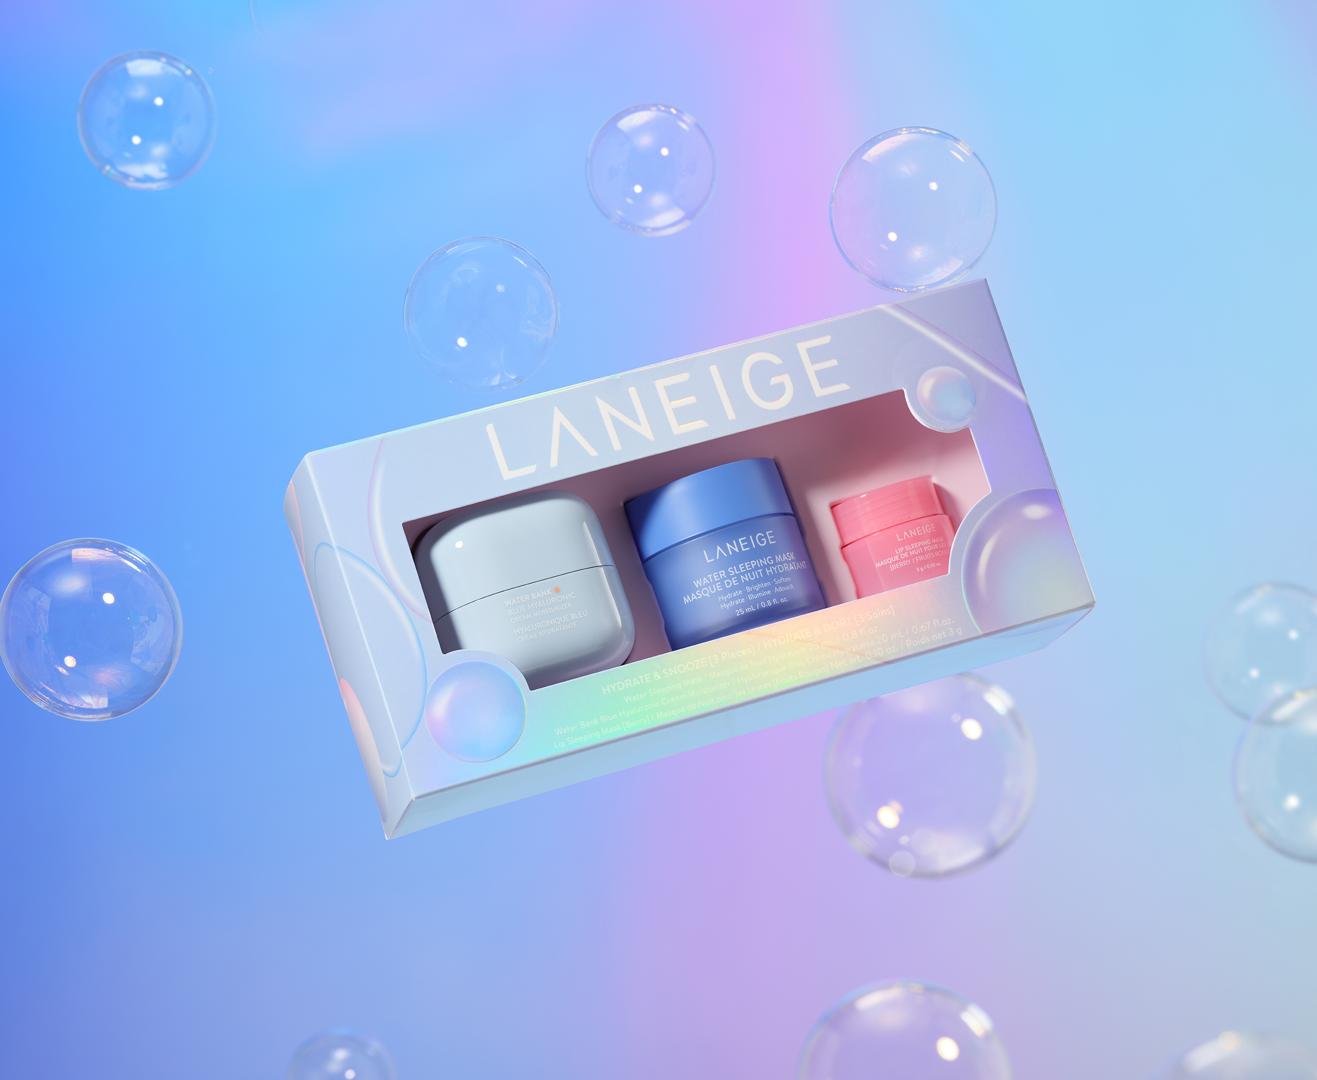 LANEIGE HOLIDAY for SEPHORA